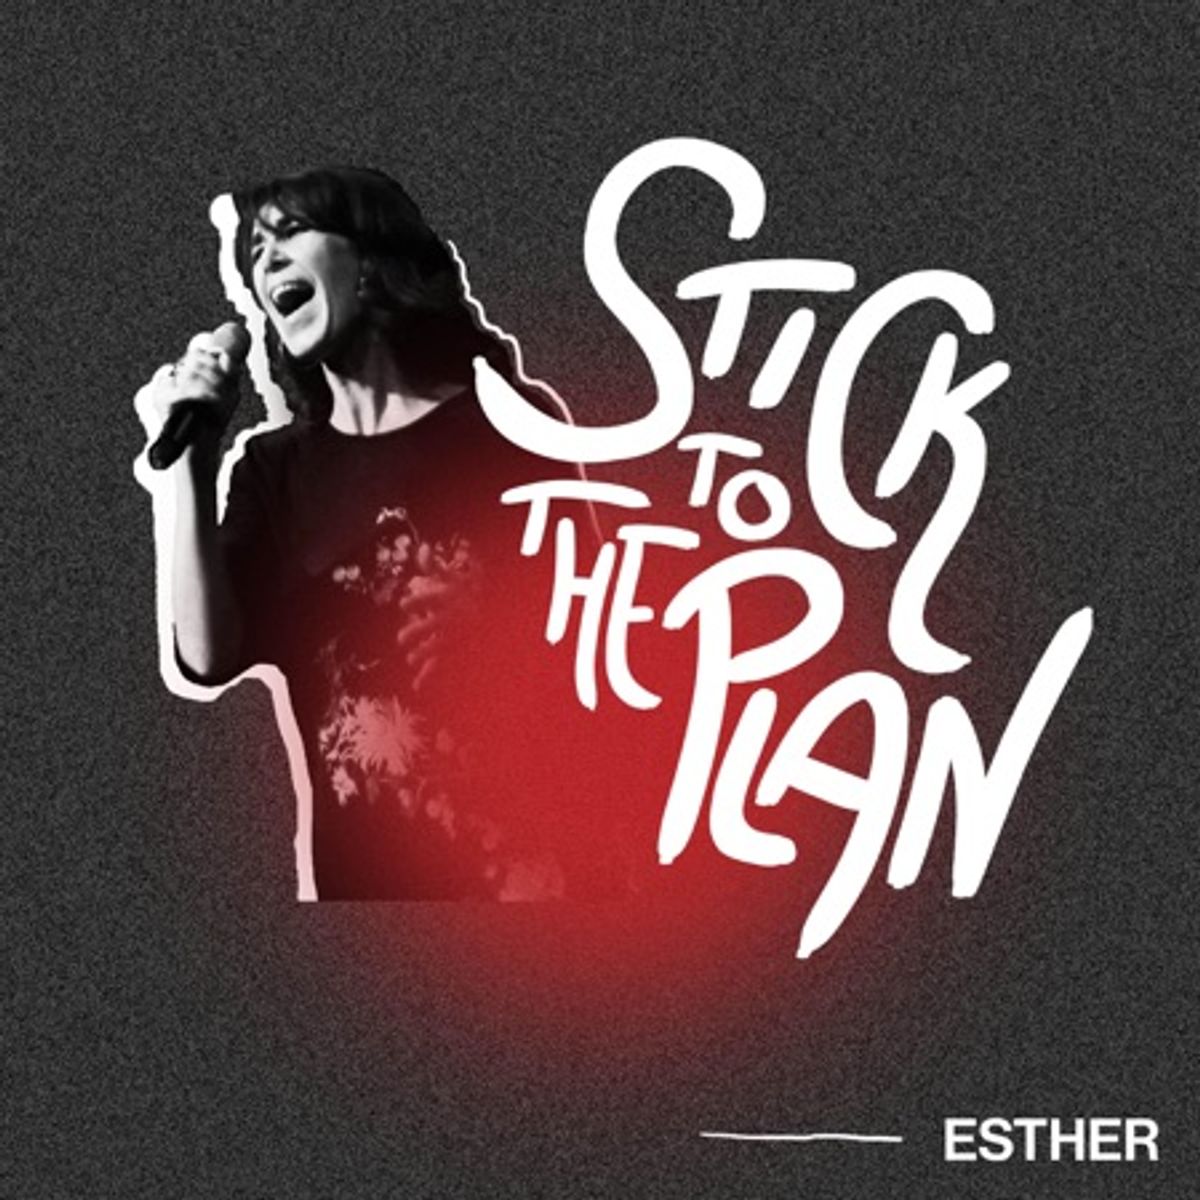 Esther - Stick To The Plan